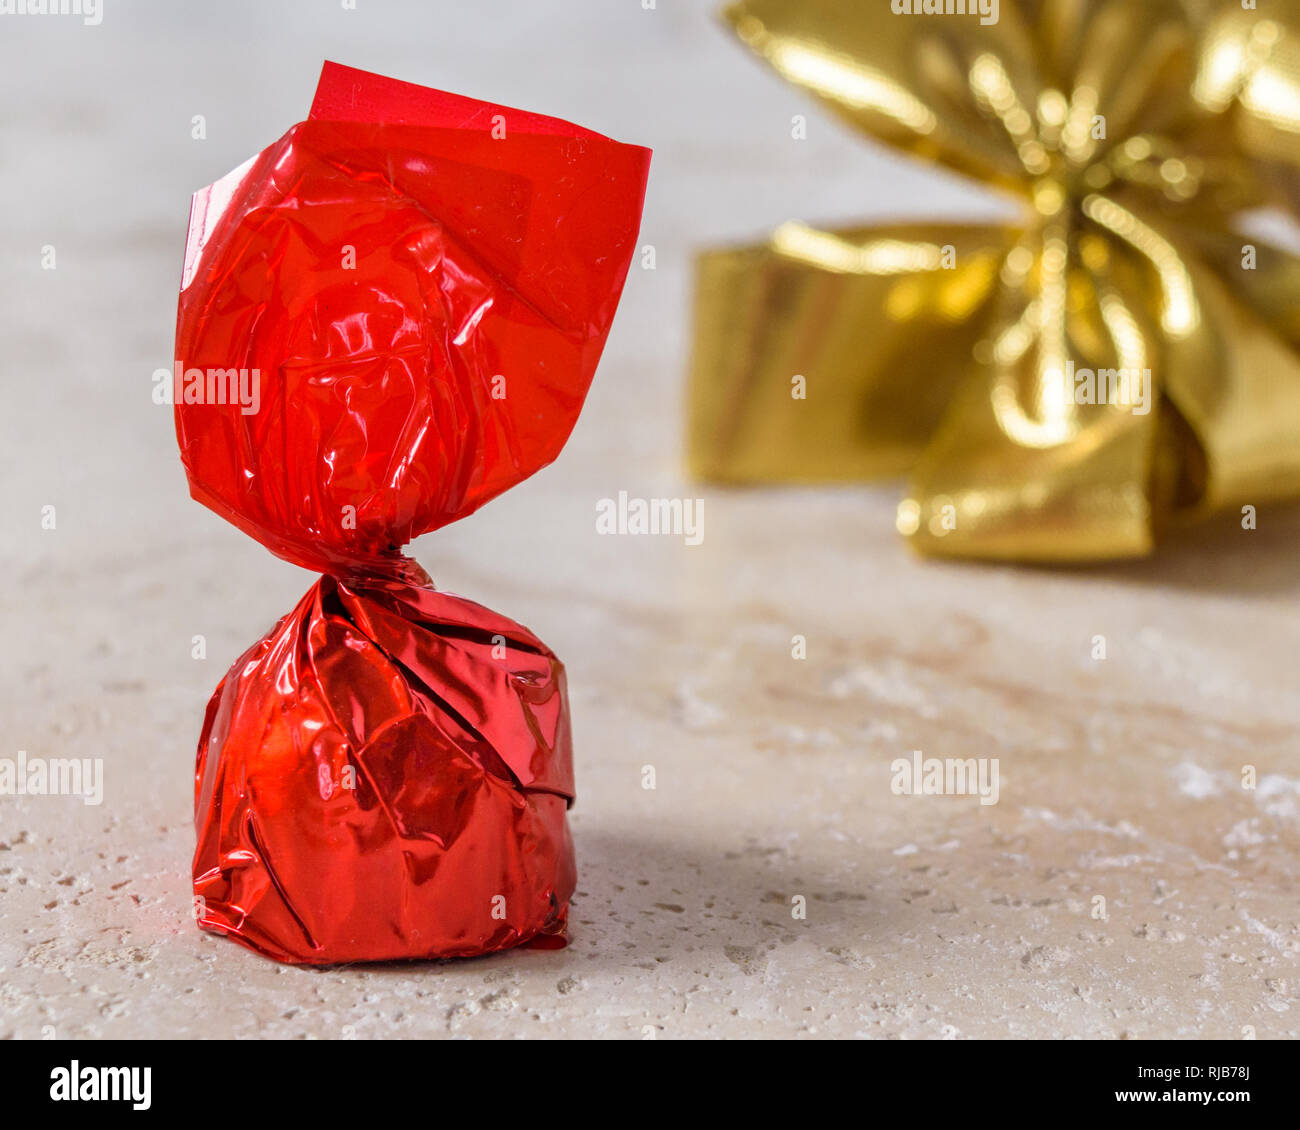 A cherry chocolate bonbon wrapped in red paper with a golden bow tie ribbon in the background. Stock Photo